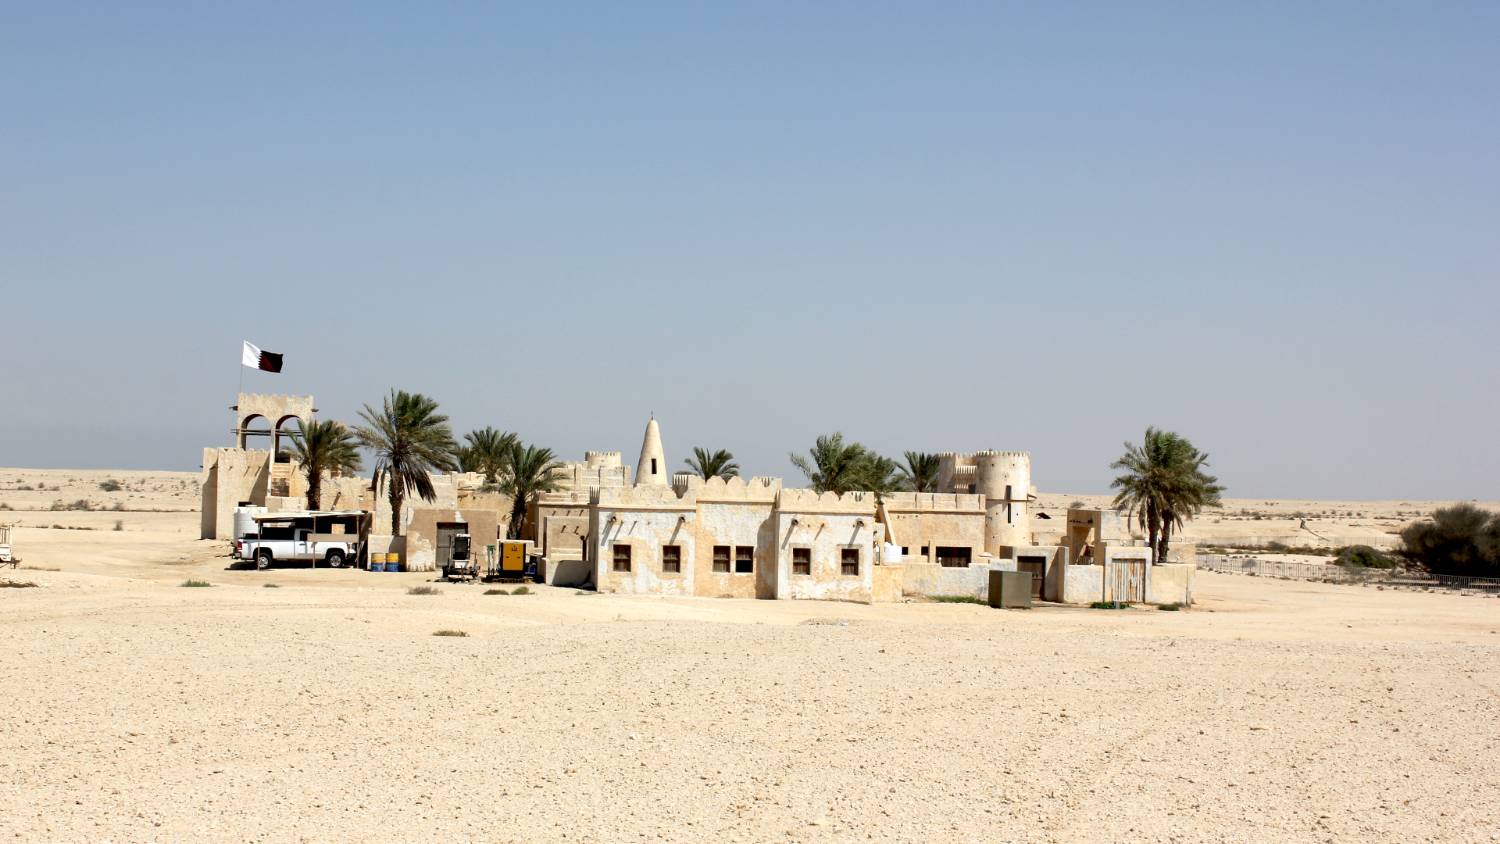 The mock-Bedouin style architecture of Film City in Qatar's Dukhan desert was built as a film set (Isabel Shultz/Flickr)